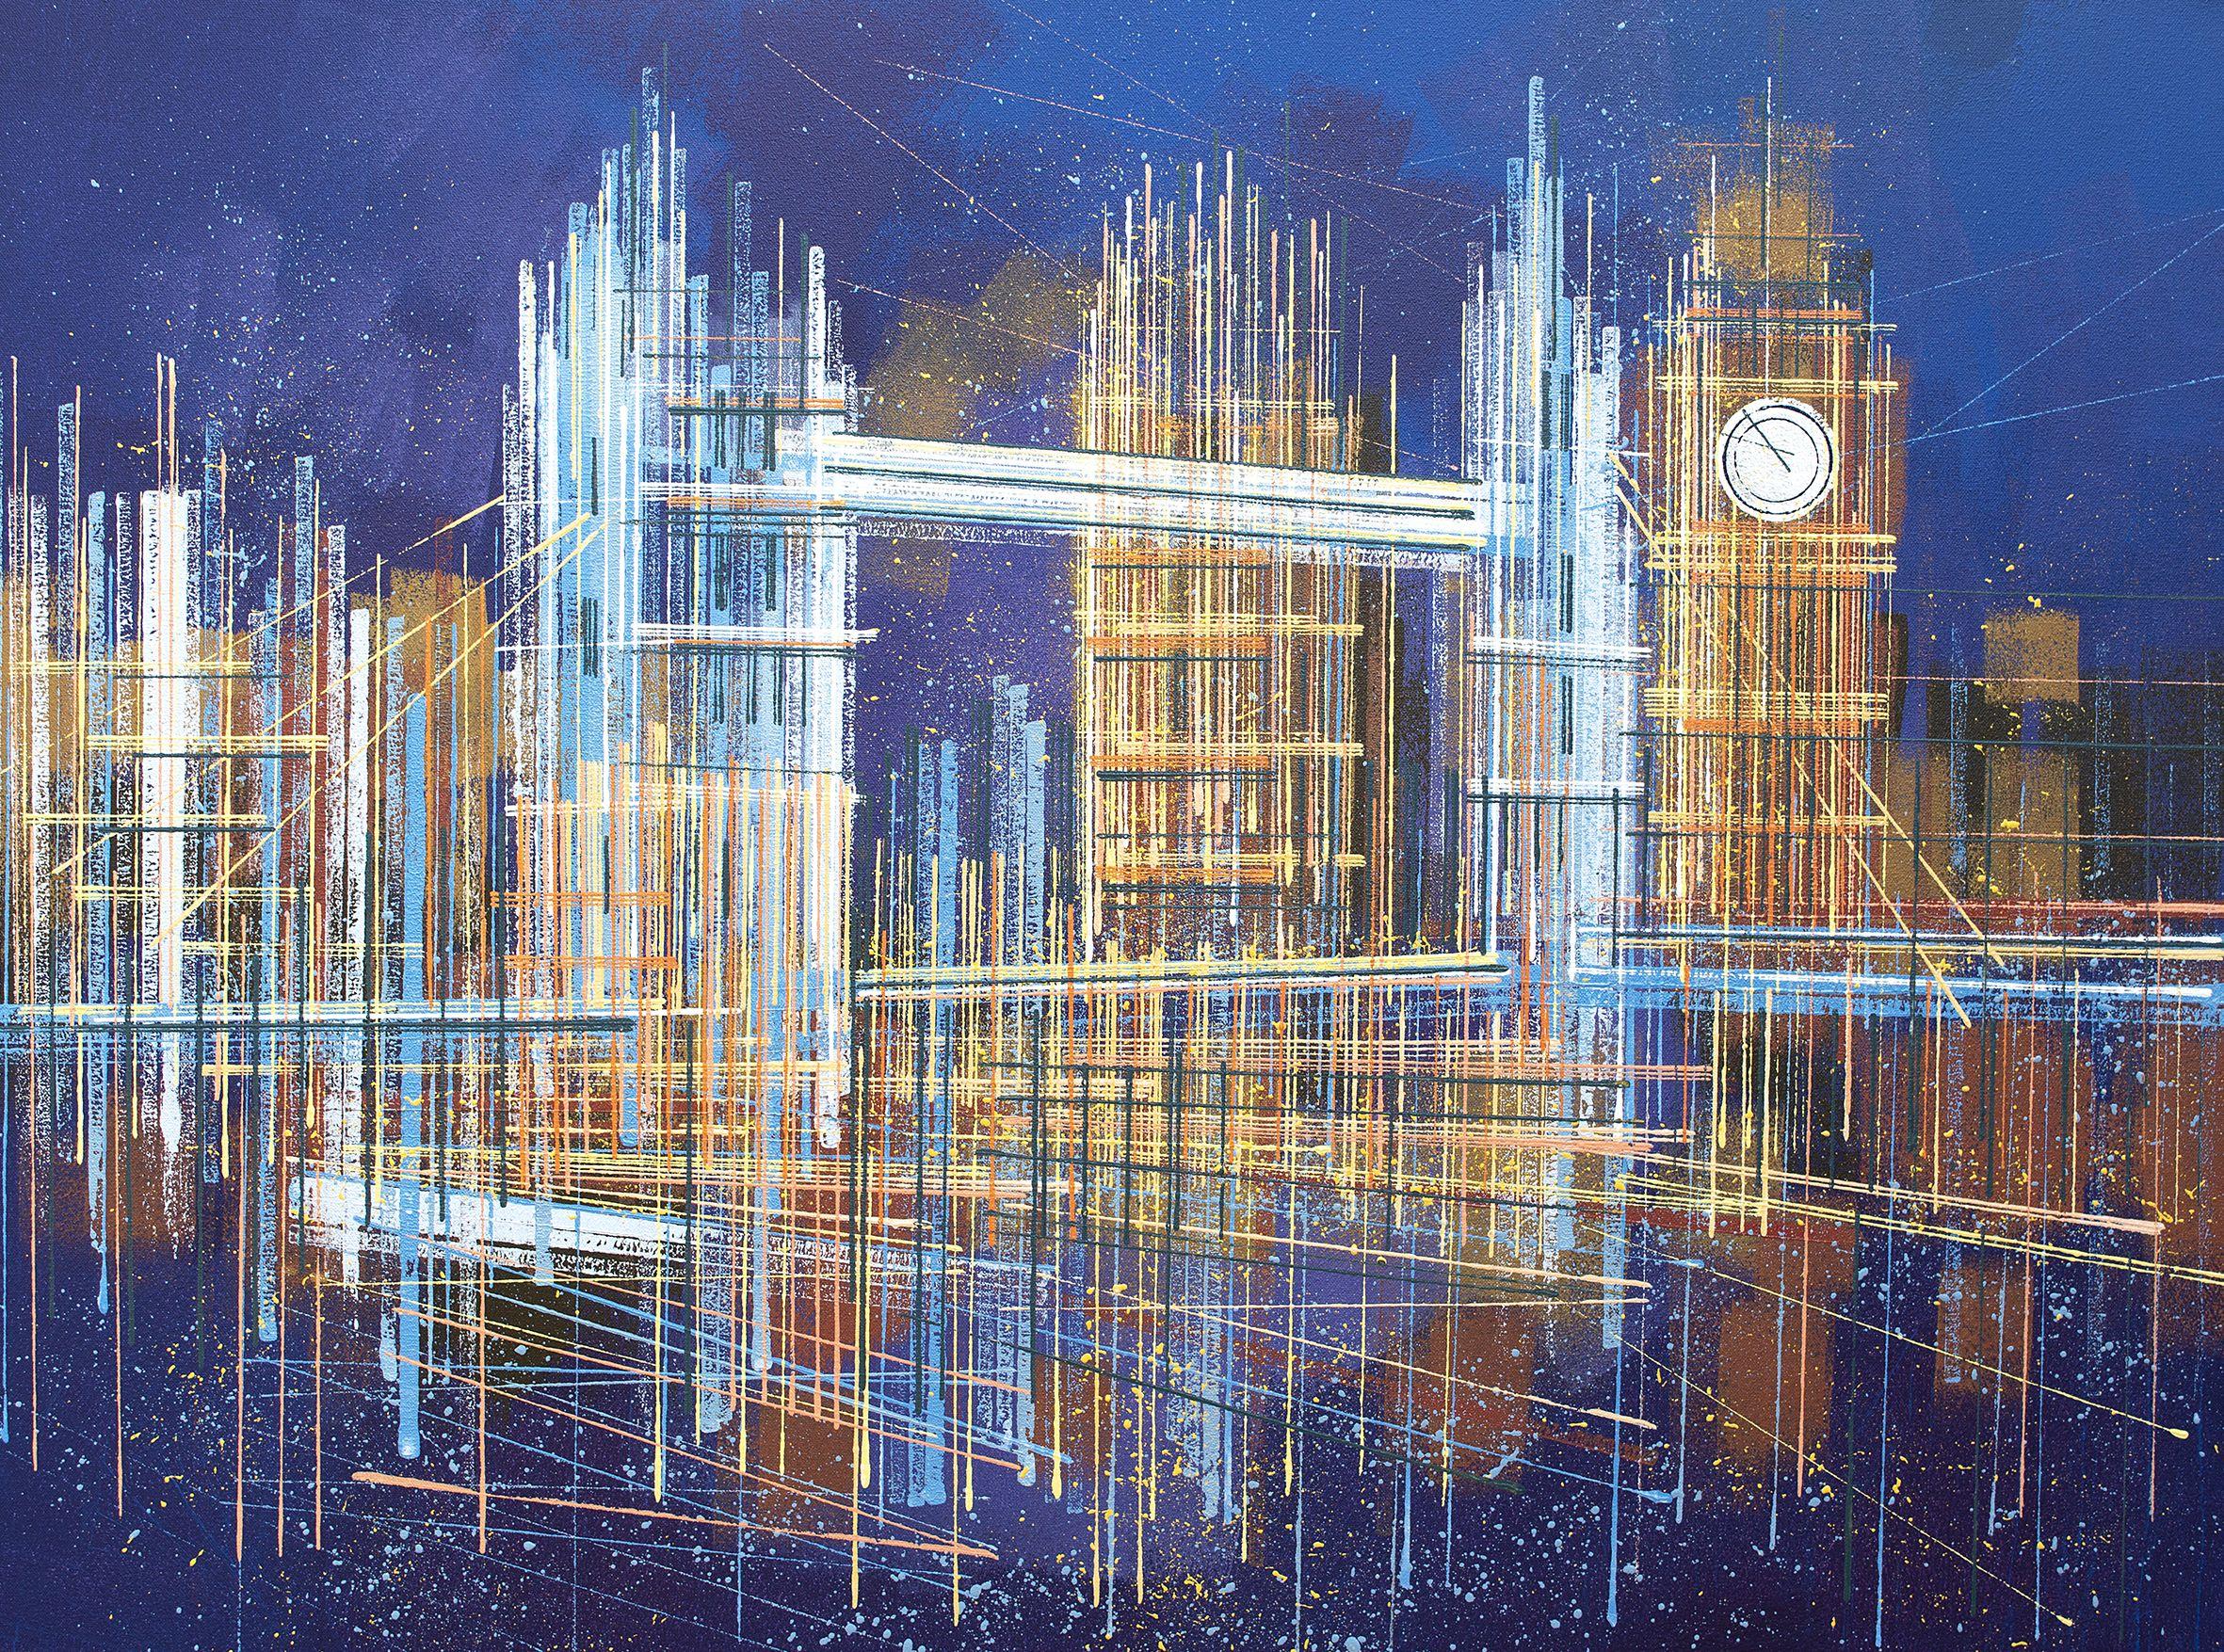 London - Tower Bridge And Big Ben Composition 1, Painting, Acrylic on Canvas